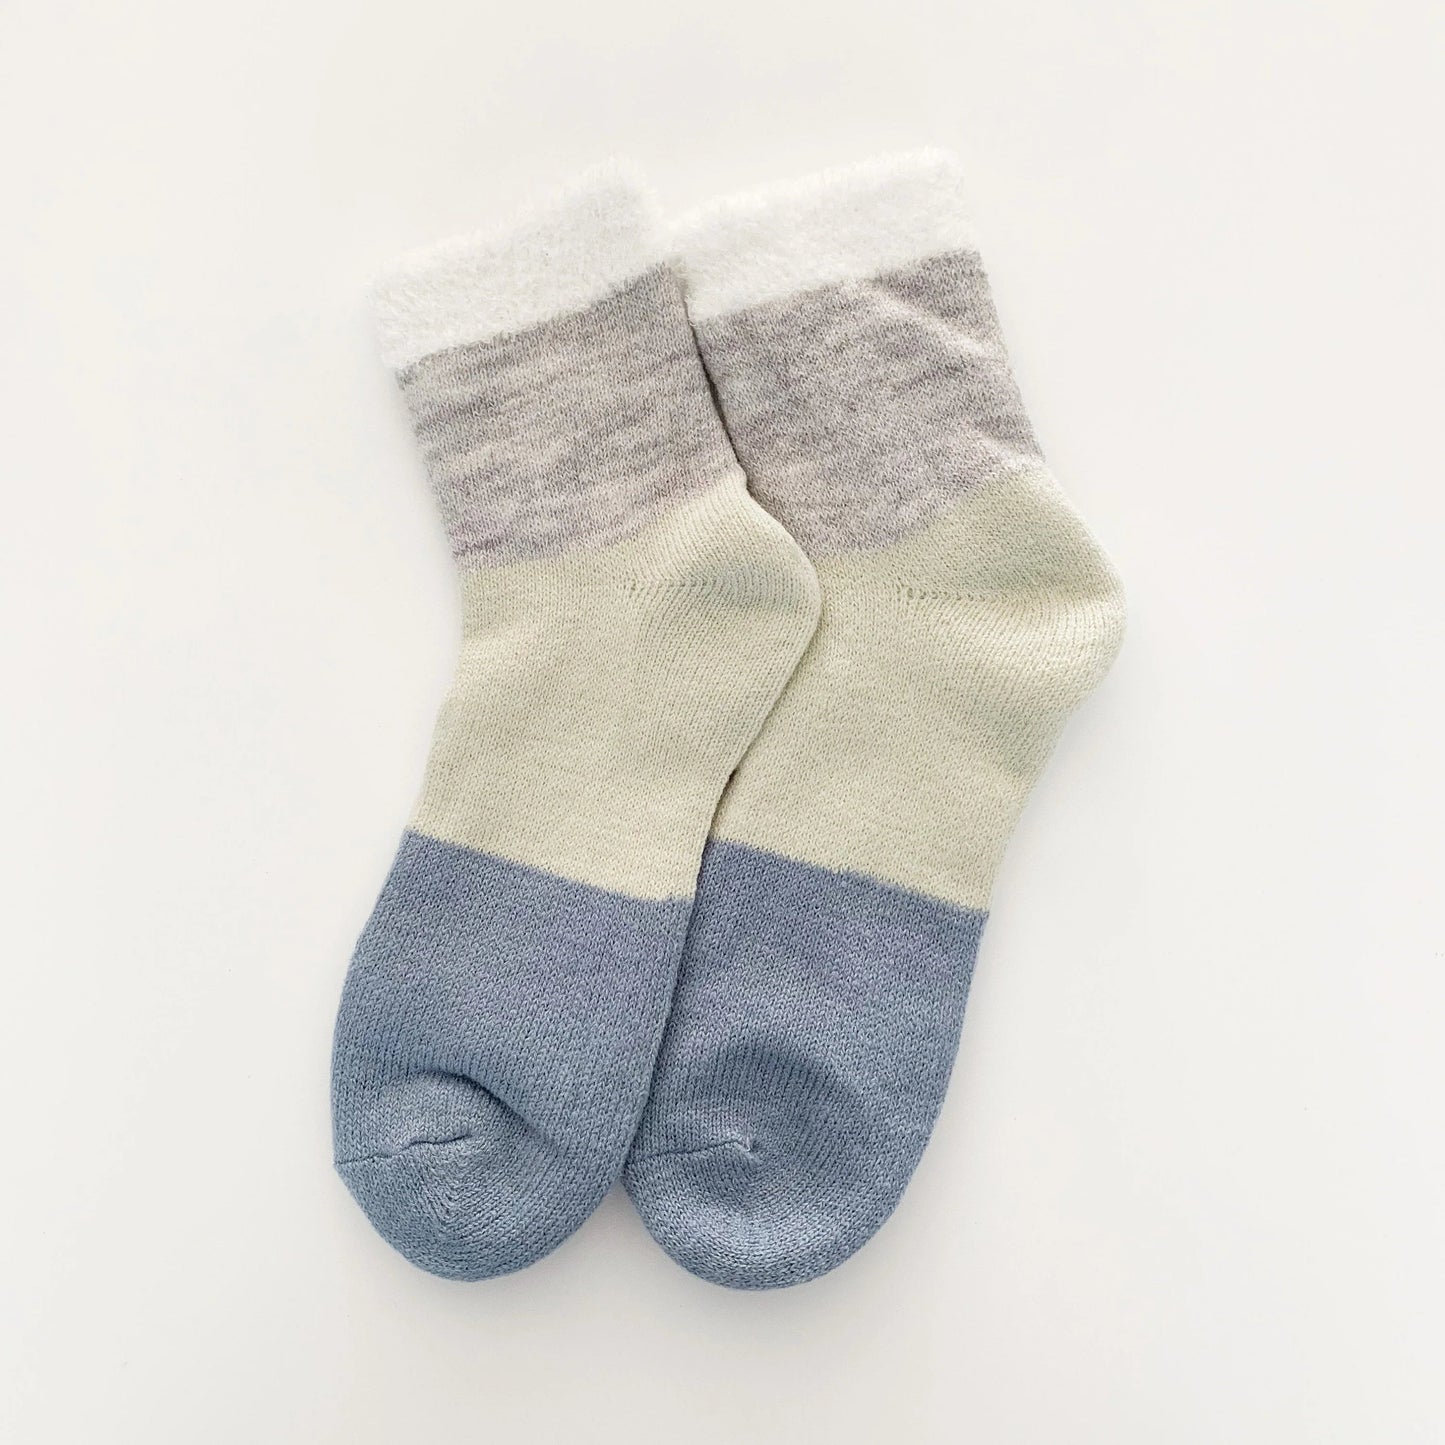 Women’s Super Soft and Cozy Double Layer Ankle Socks